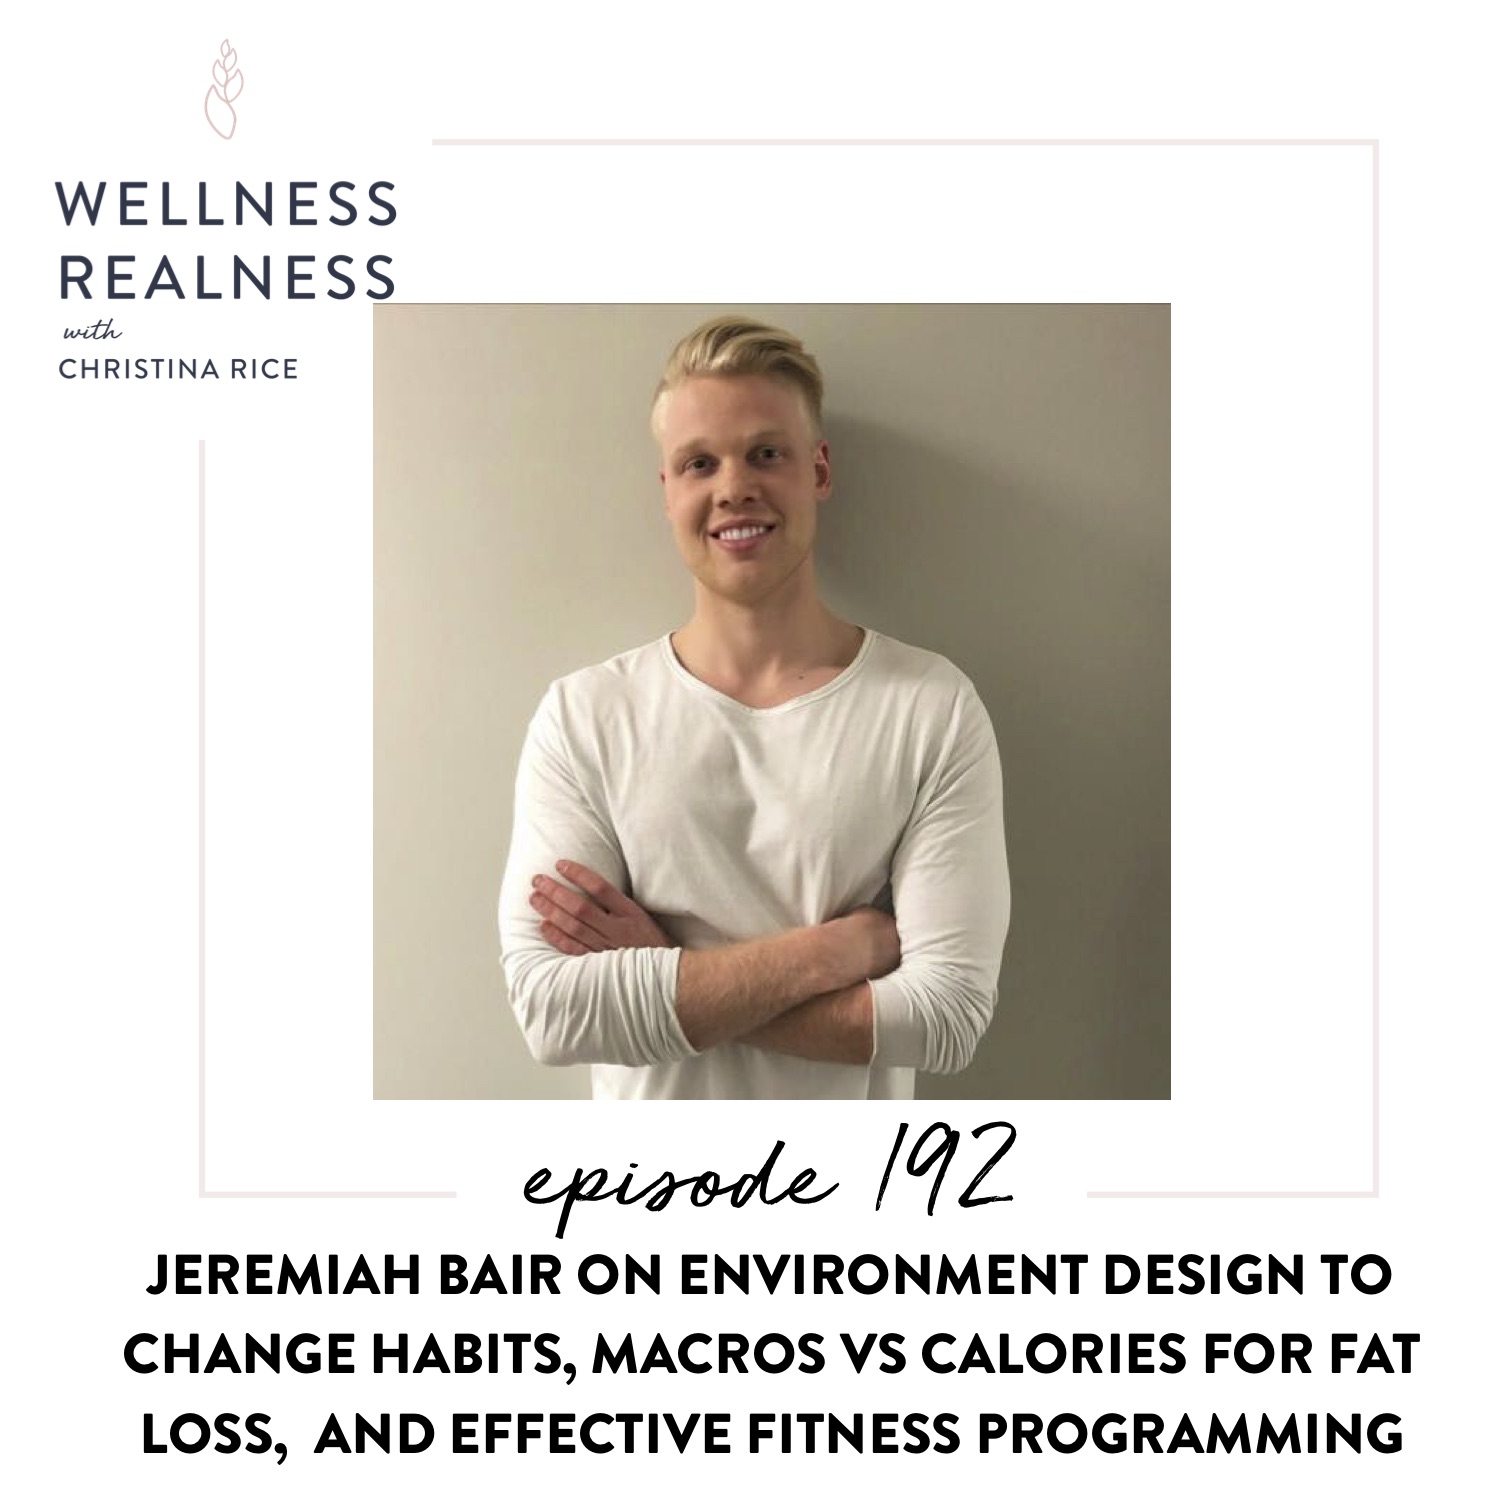 192: Jeremiah Bair on Environment Design to Change Habits, Macros Vs Calories for Fat Loss, and Effective Fitness Programming